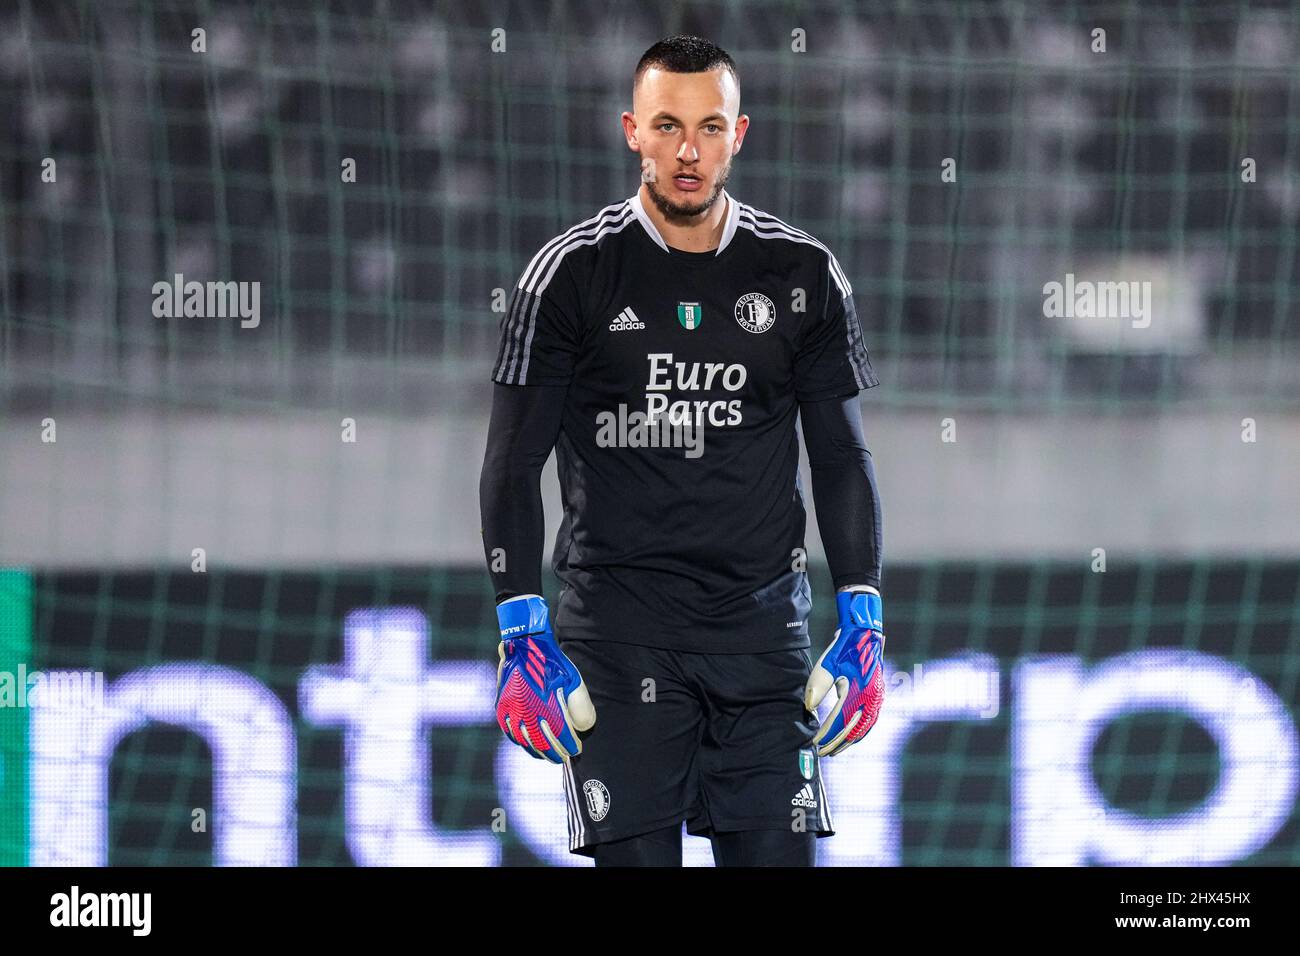 Belgrade - 9 March 2022, Goalkeeper Justin Bijlow of Feyenoord during the press conference and training of Feyenoord at Partizan Stadium on 9 March 2022 in Belgrade, Serbia. (Box to Box Pictures/Yannick Verhoeven) Stock Photo